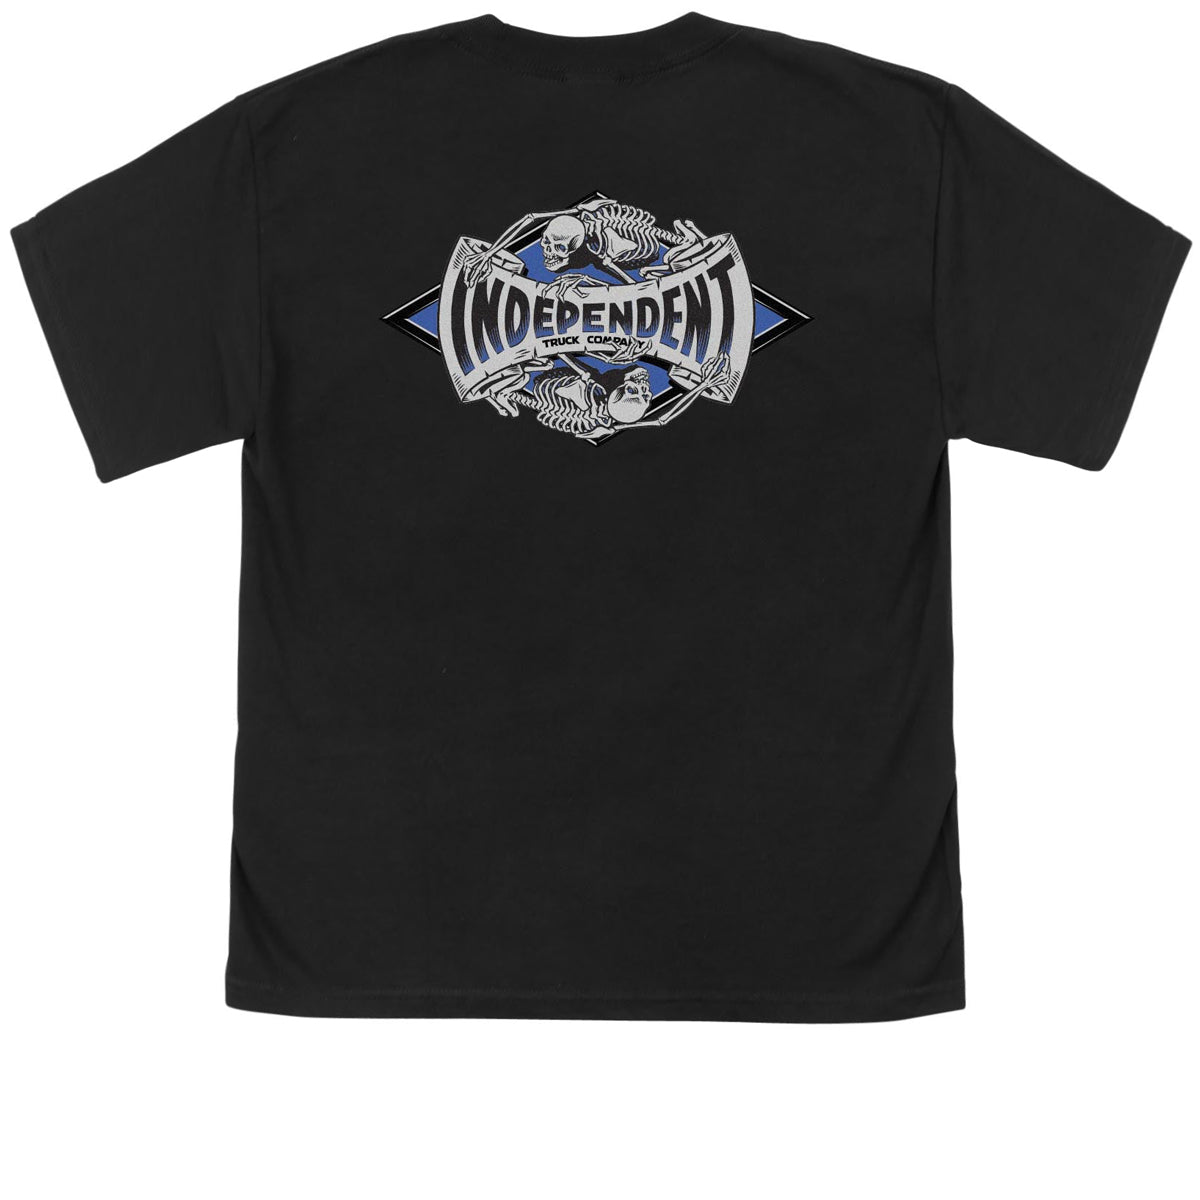 Independent Youth Legacy T-Shirt - Black image 1